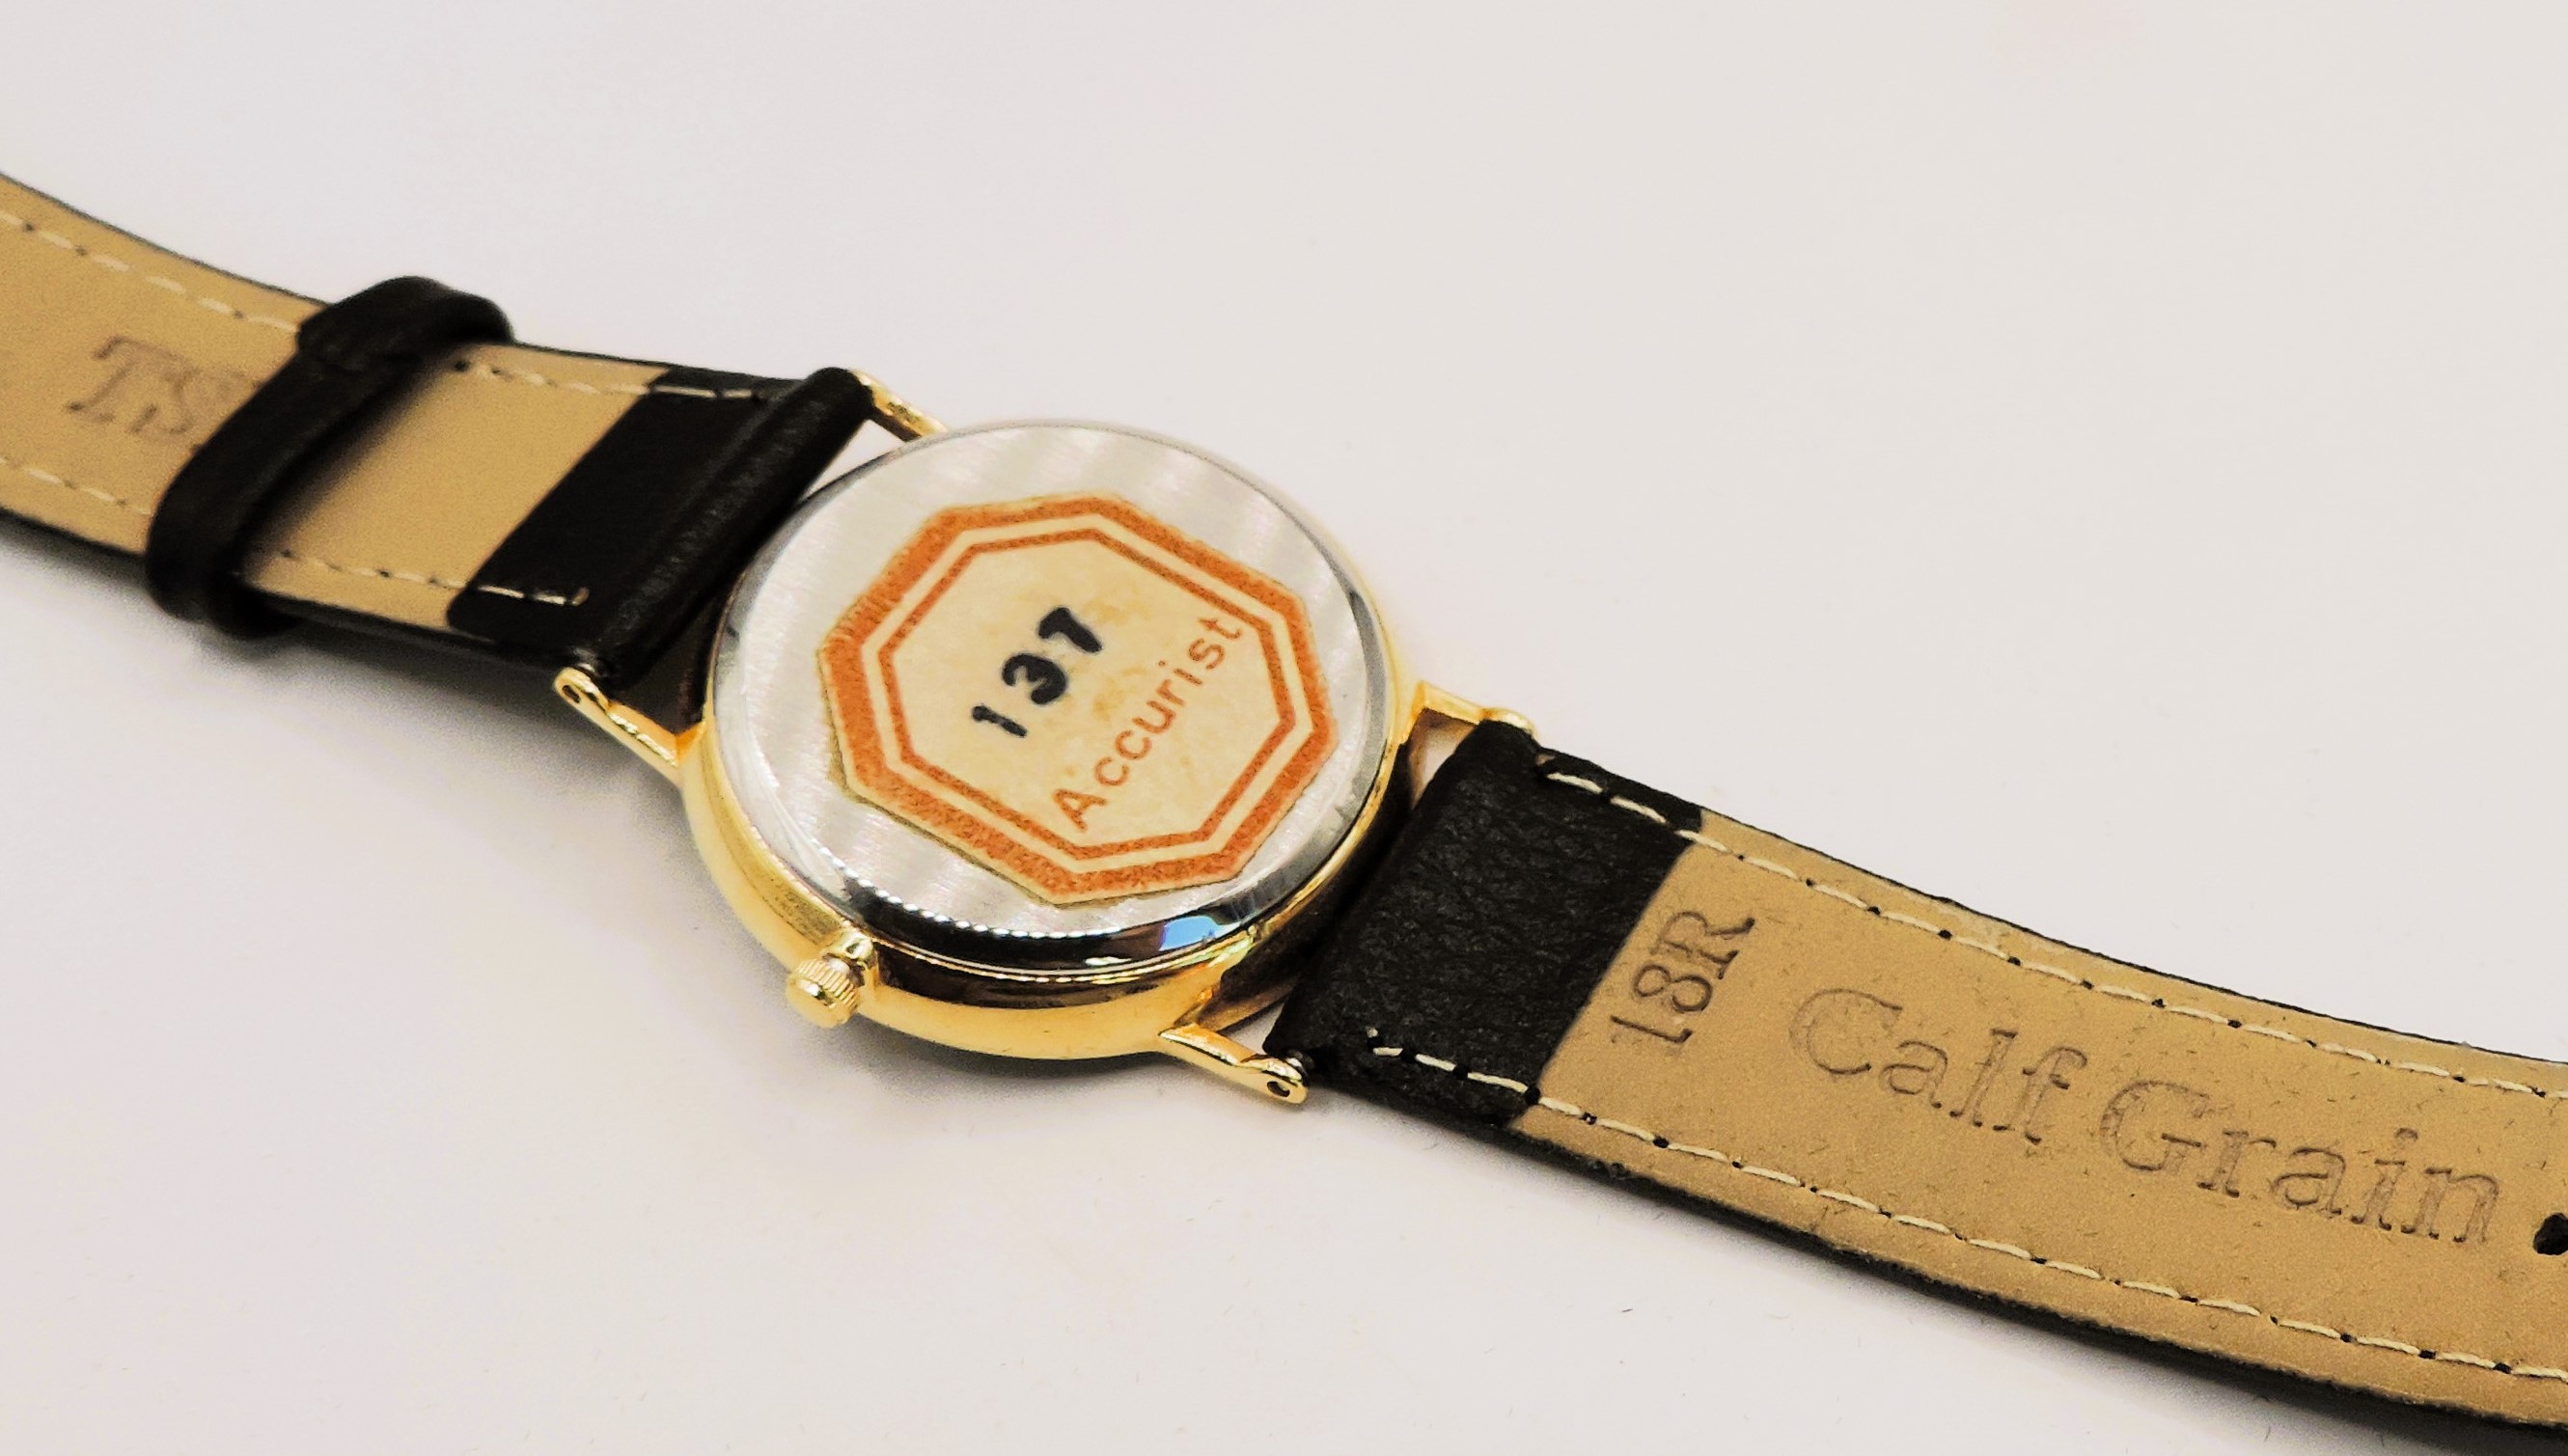 Accurist Slim Watch #137000 Gold Plated Leather Strap Original Box New Battery Working - Image 5 of 8